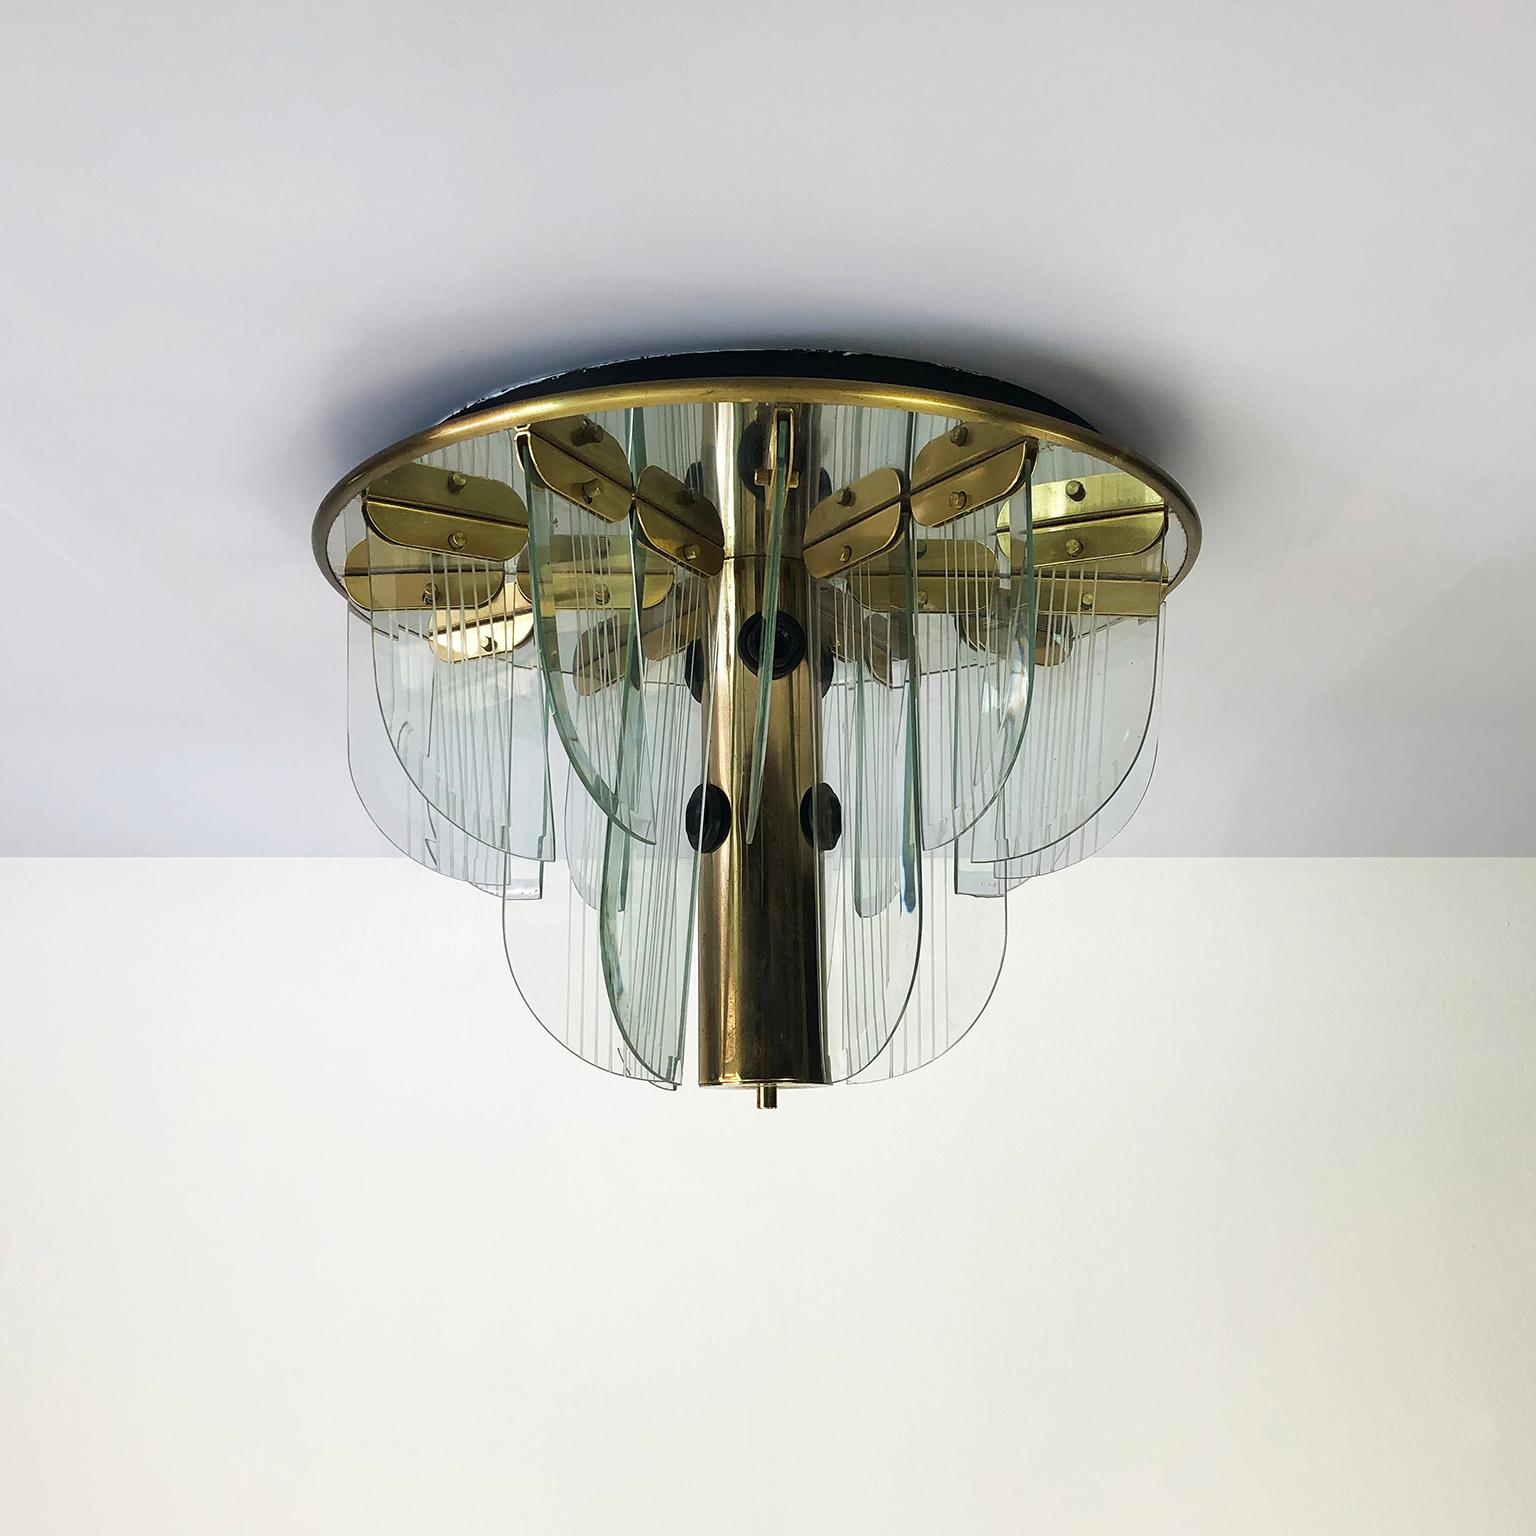 Circa 1970. We offer this pair of mount ceiling Lights attributed to Lightolier.